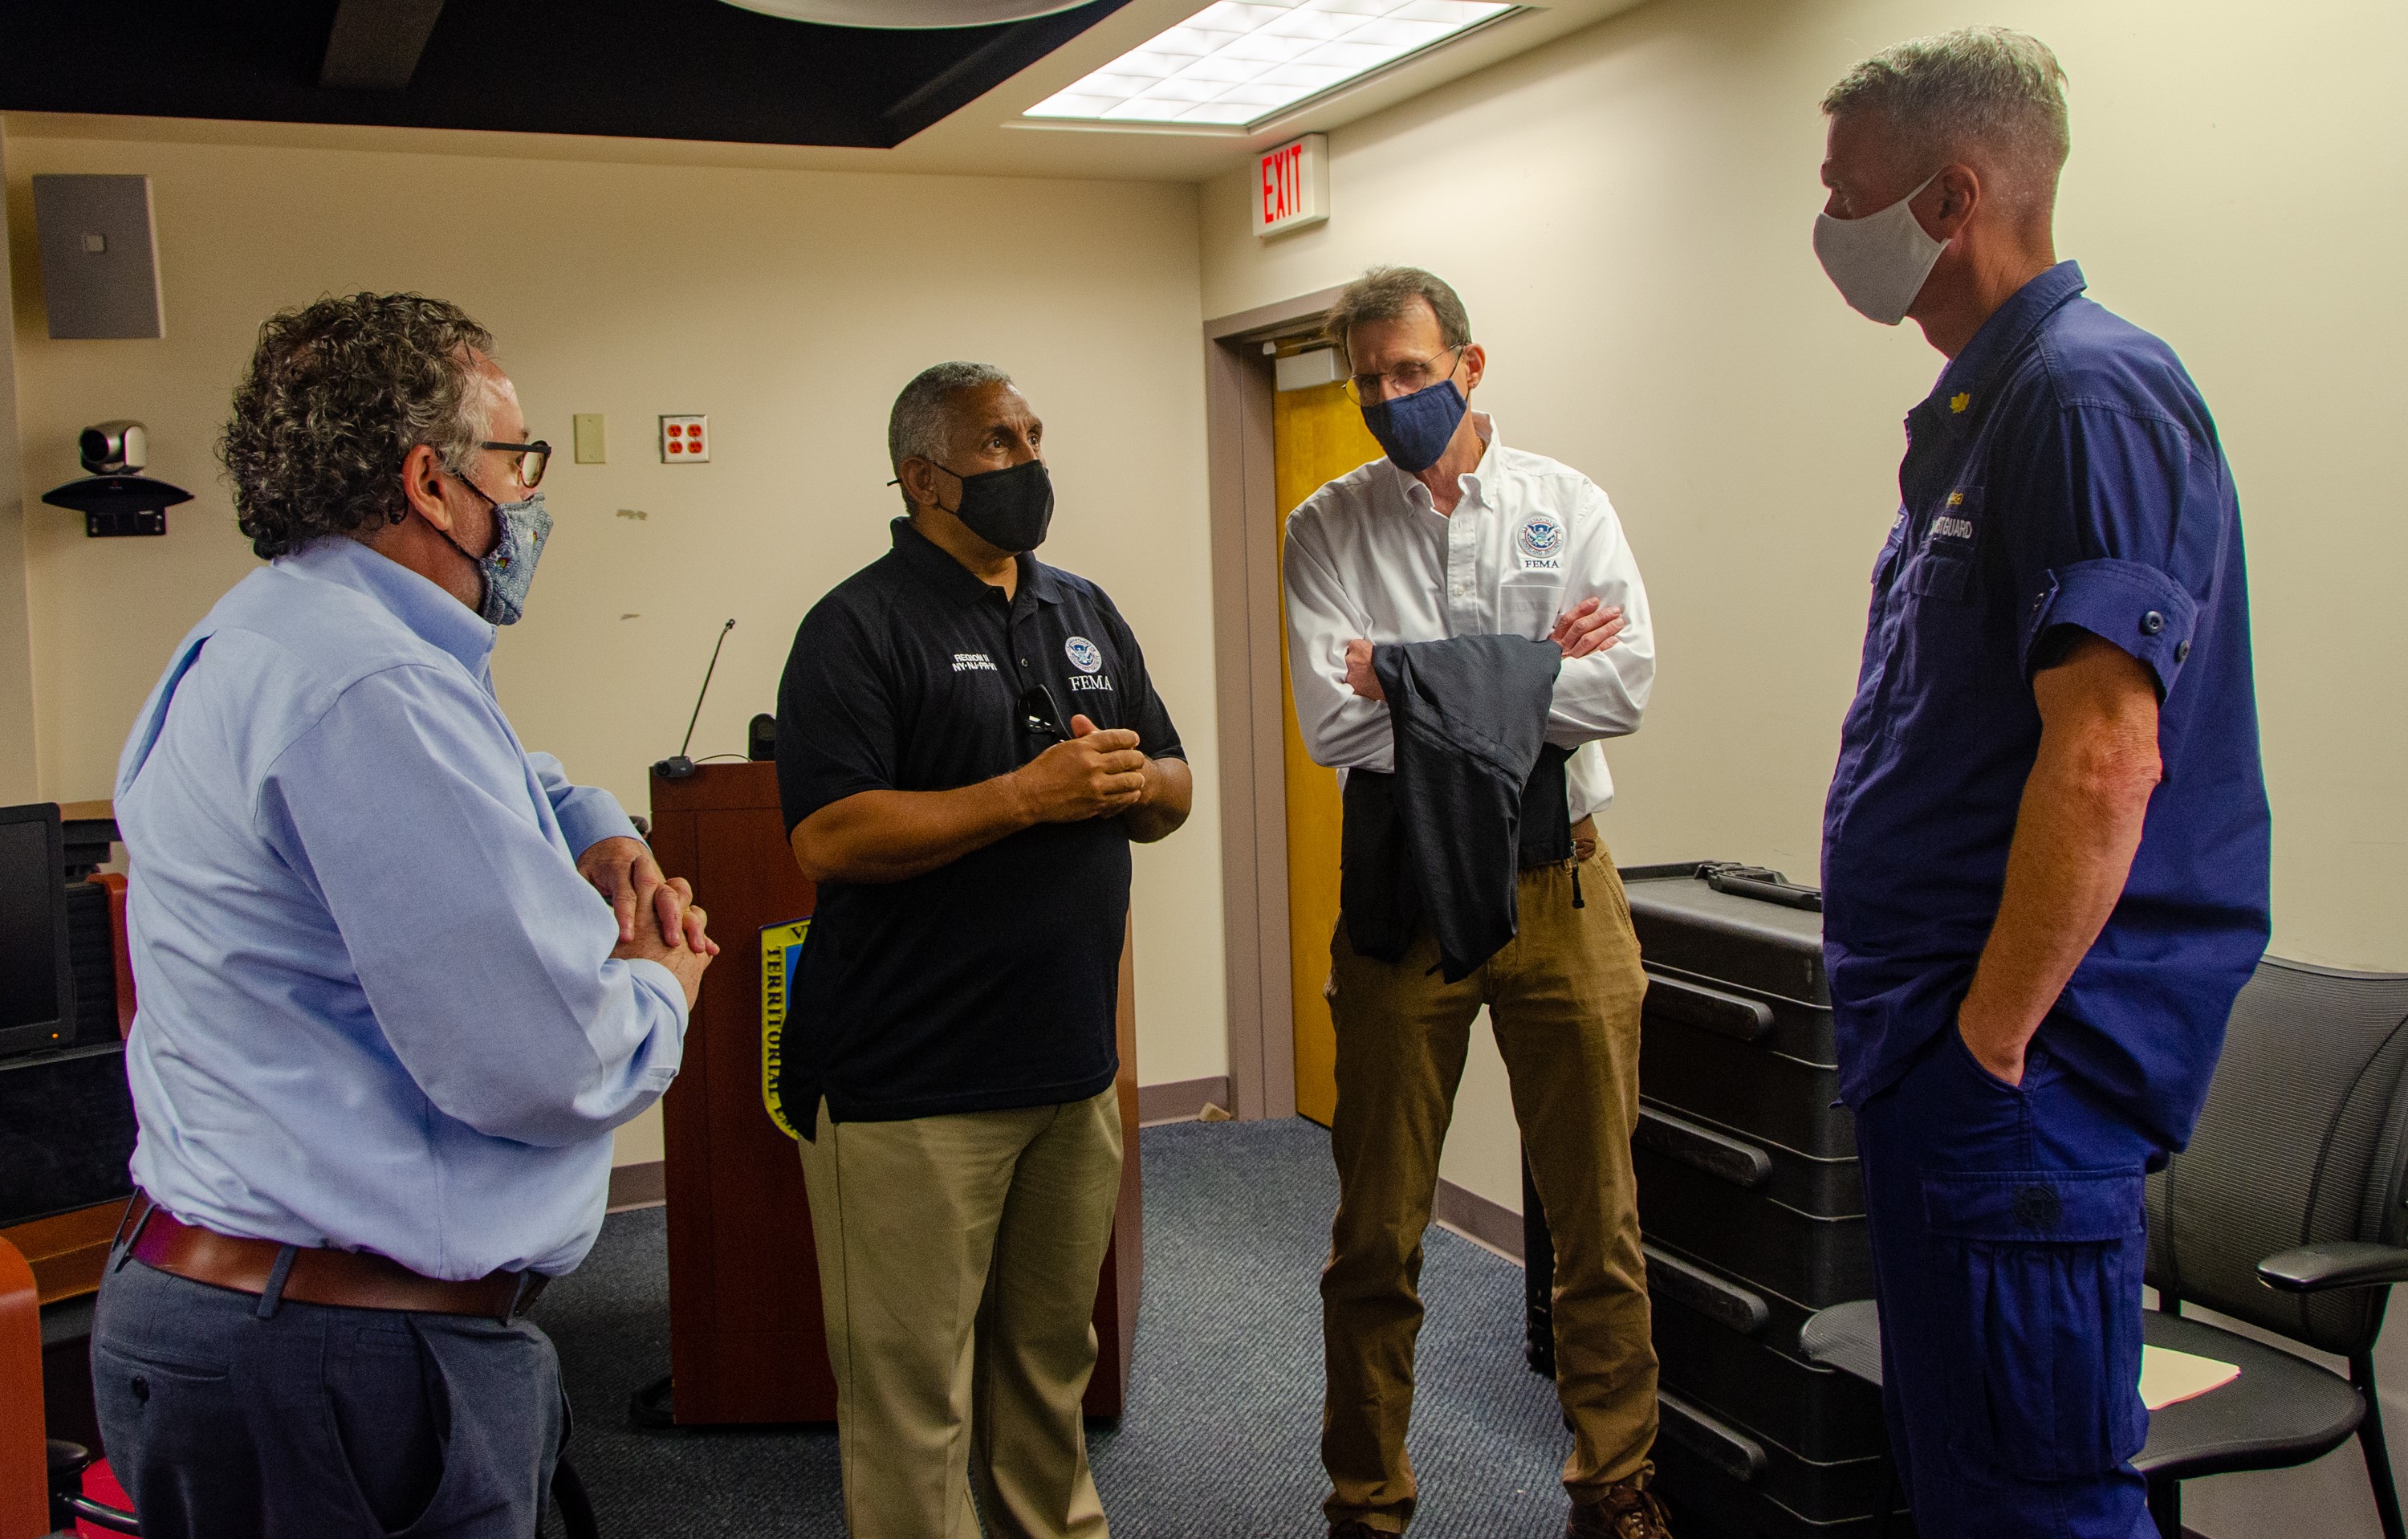  Region 2 Preparedness Division Director Russell Fox, (from left), U.S. Virgin Islands Caribbean Area Office Coordinator Mark A. Walters, Region 2 Acting Administrator Thomas Fargione and U.S. Coast Guard Lt. Cmdr. JJ League discuss hurricane preparedness for maritime operations during an Emergency Management Council Meeting at the V.I. Territorial Emergency Management Agency's Emergency Operations Center.  